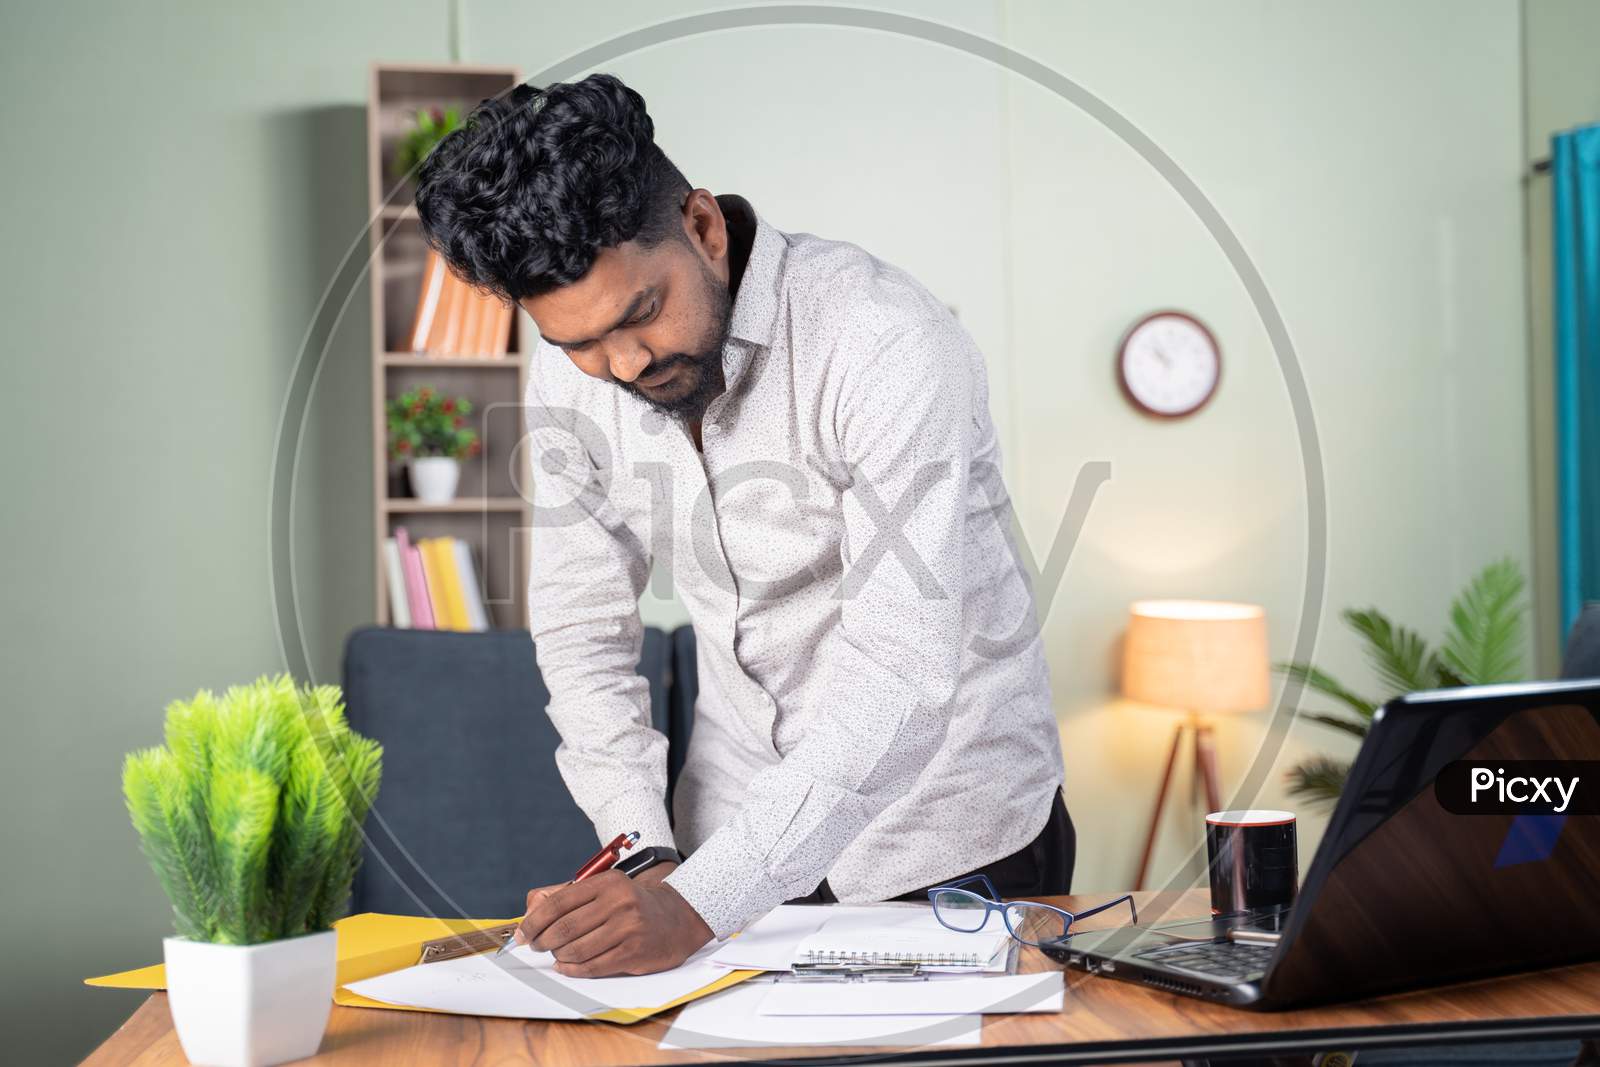 Young Business Man Busy In Paperwork By Referring Documents And Laptop - Concept Of Preparing Plan, Managing Tasks By Standing At Office Table.